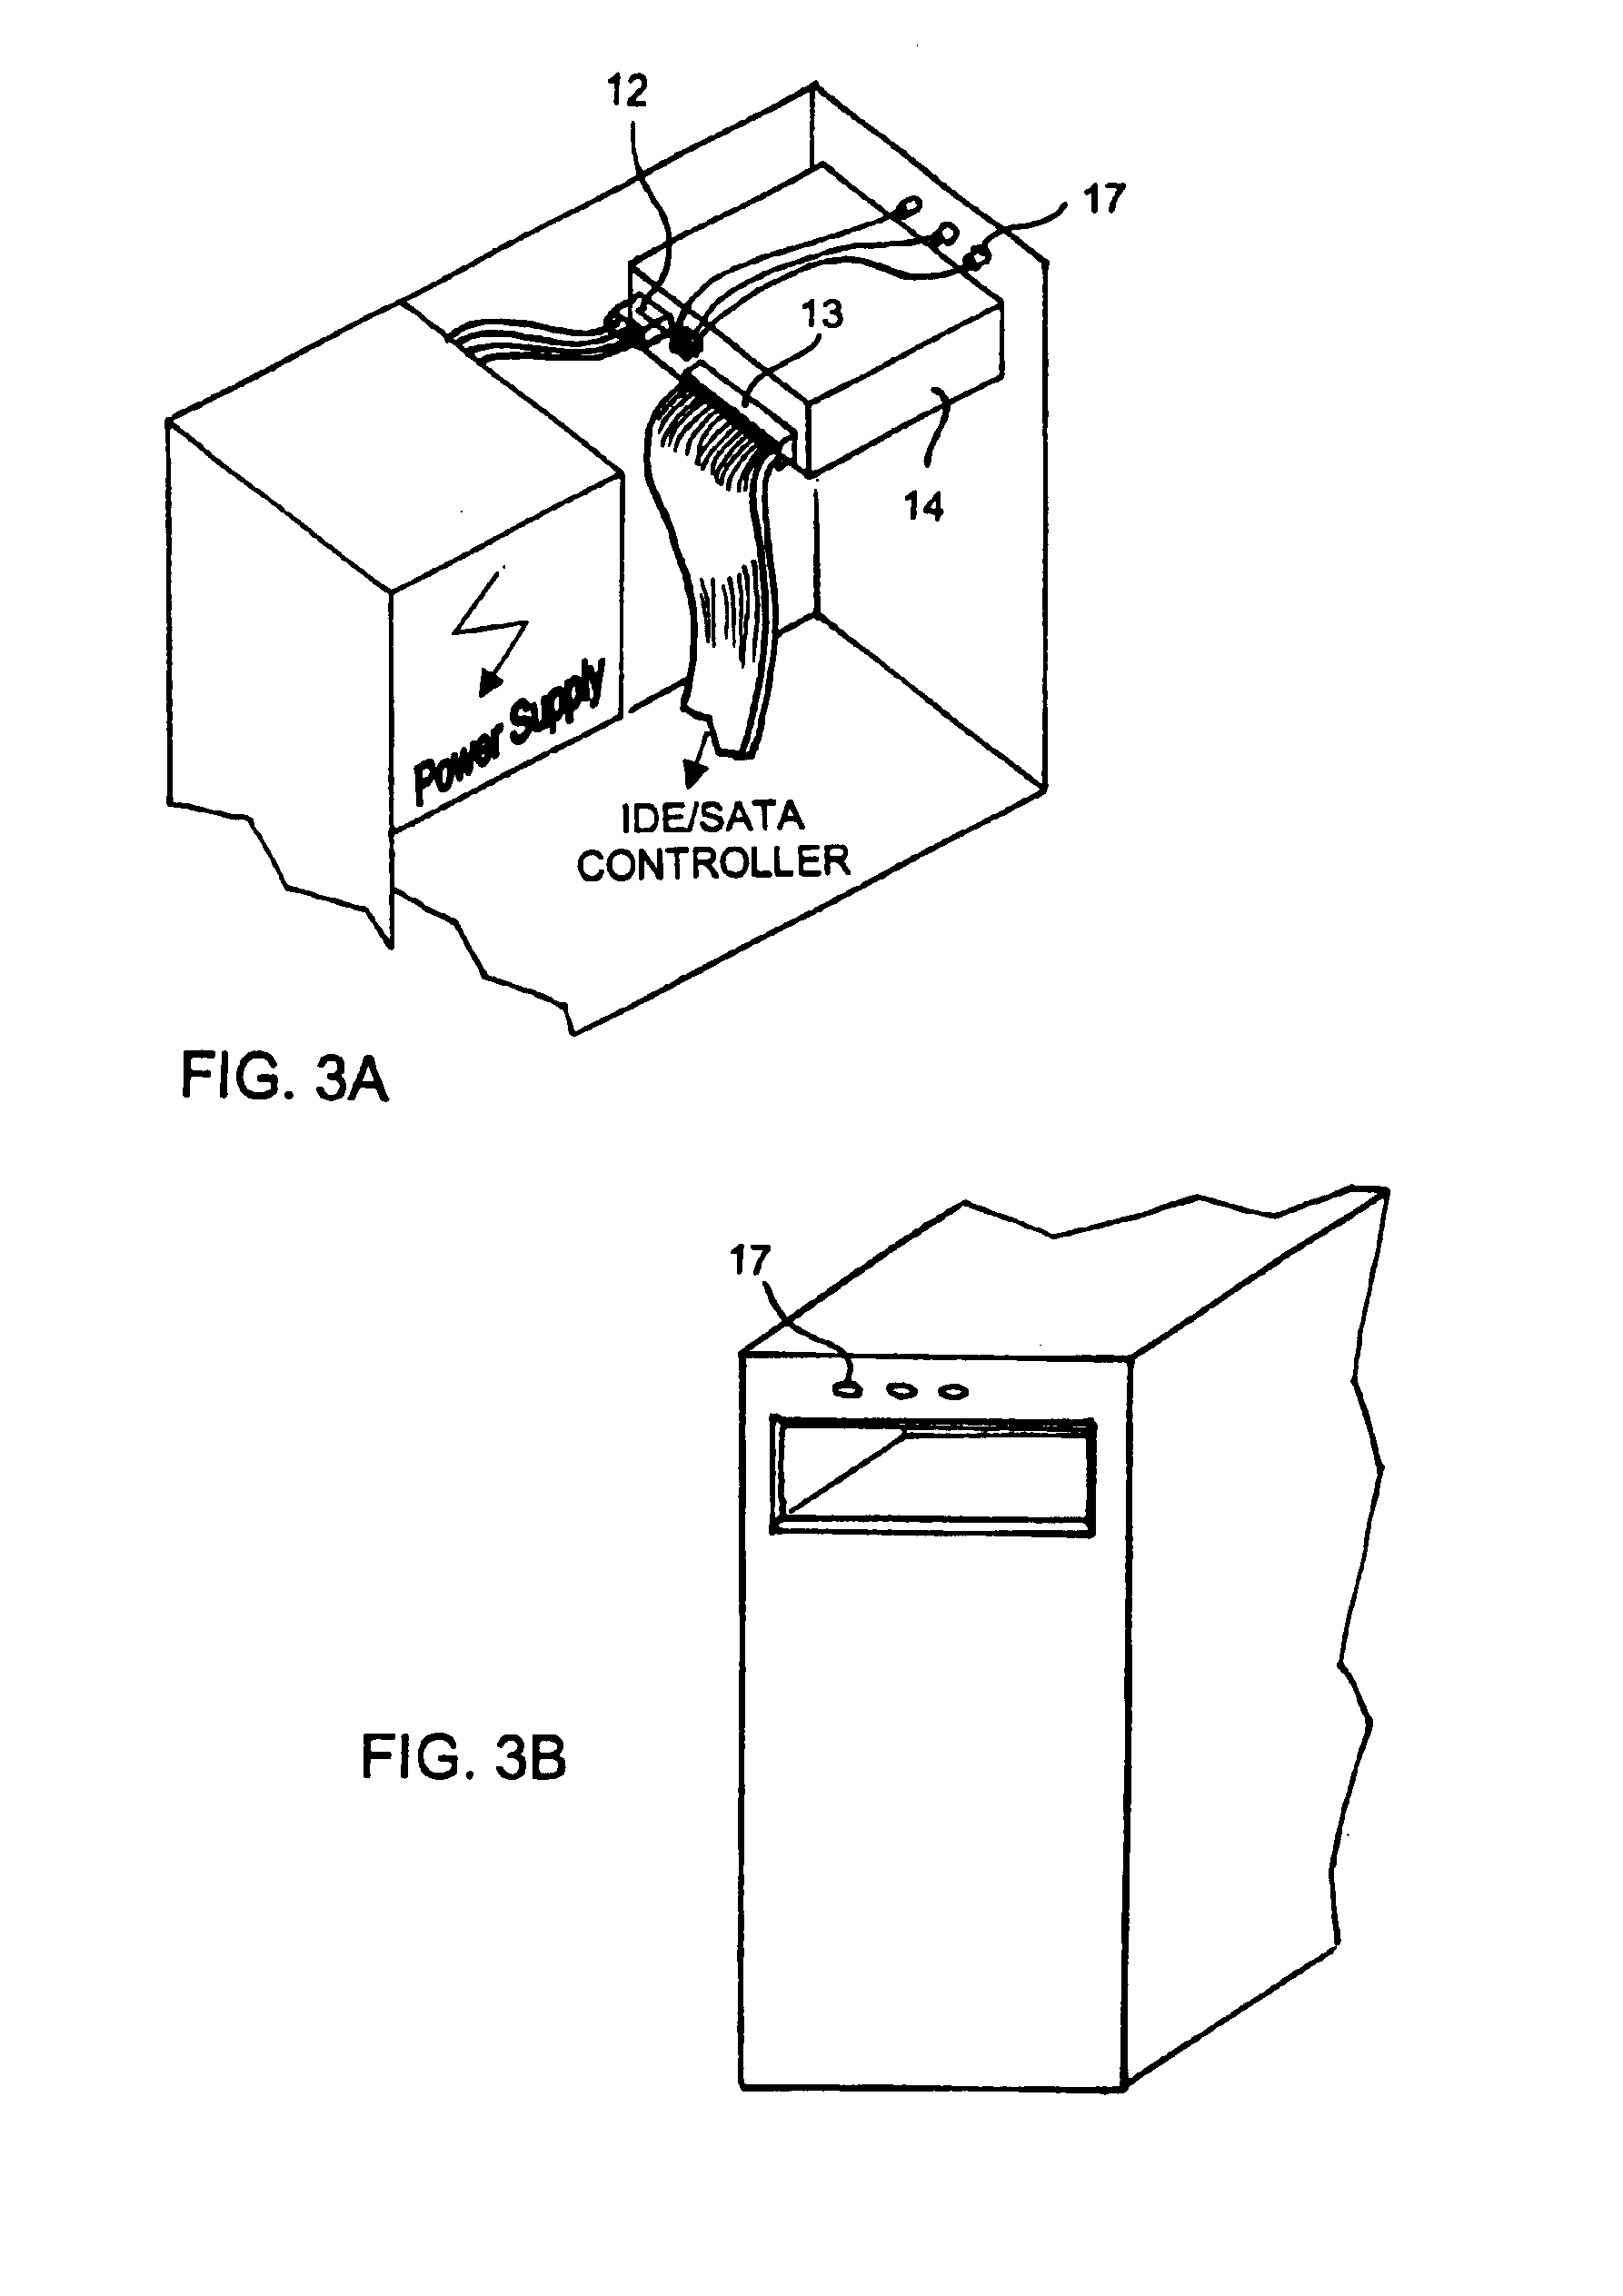 Removable hard drive assembly, computer with a removable hard disk drive, method of initializing and operating a removable hard drive